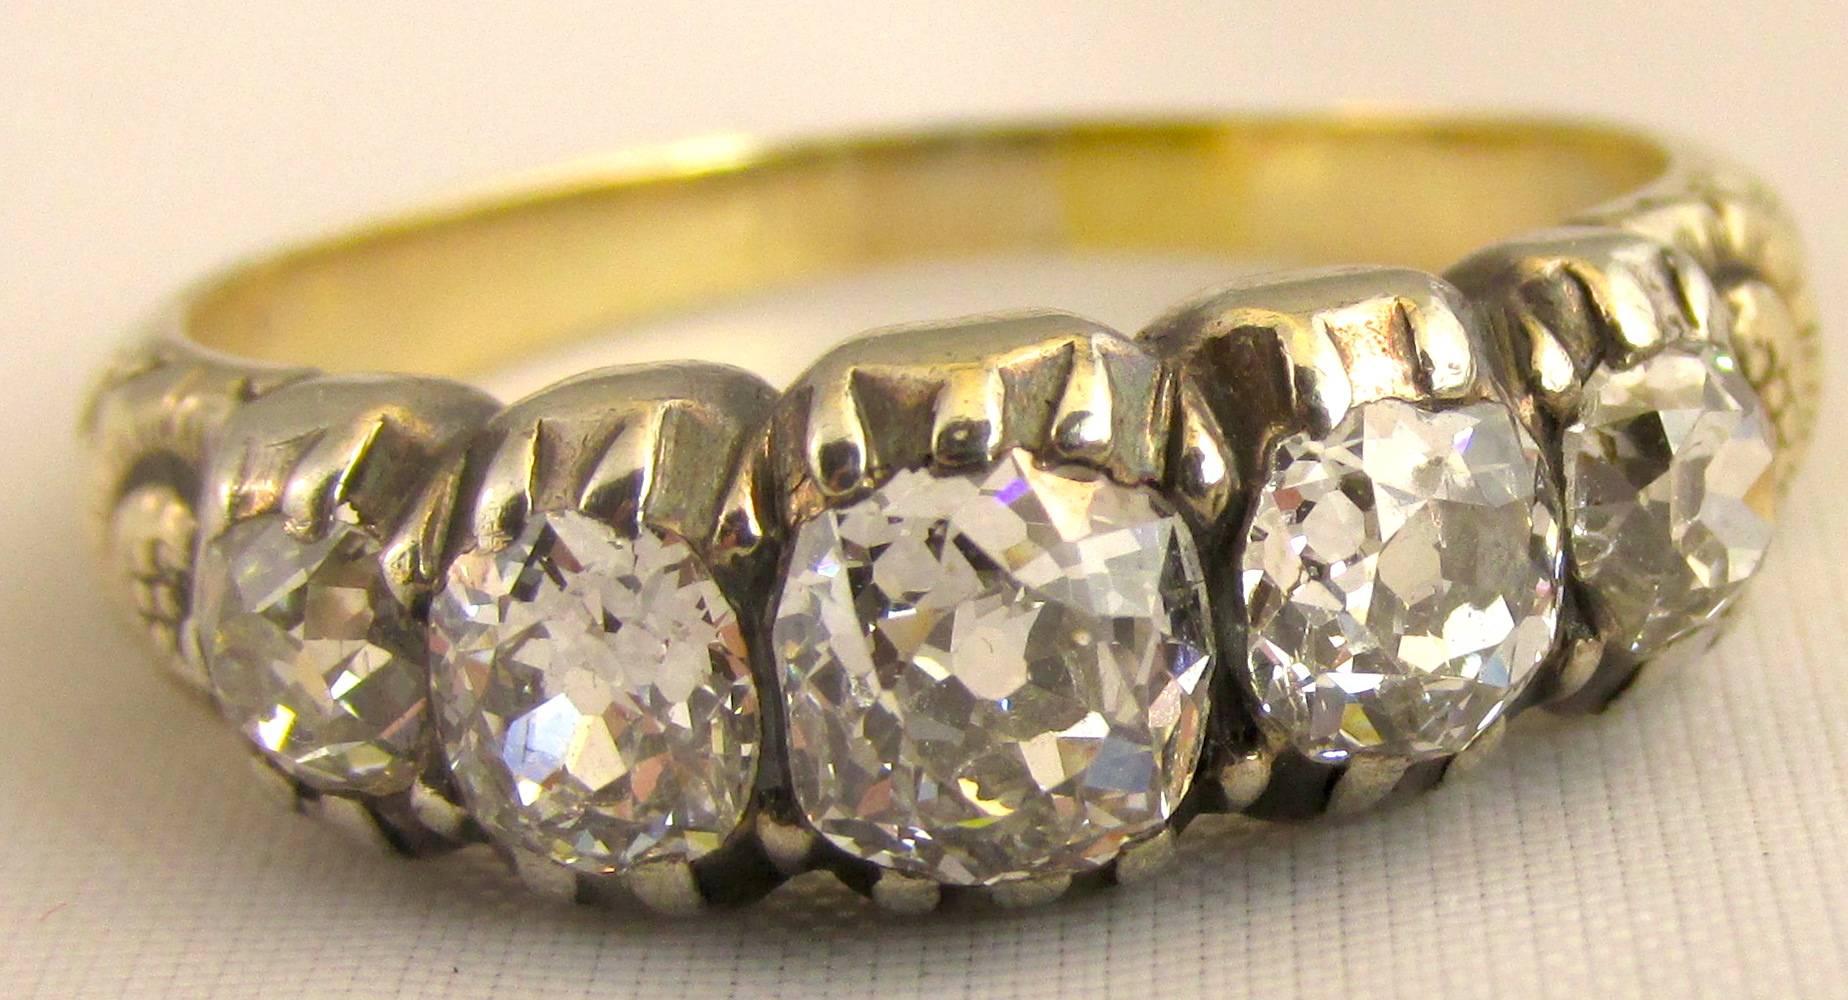 Exquisite early Victorian five stone cushion cut diamond ring set in a chased 18K gold band. Wonderful to wear with a wedding band or other 5 stone rings. The ring is a size 7.25.